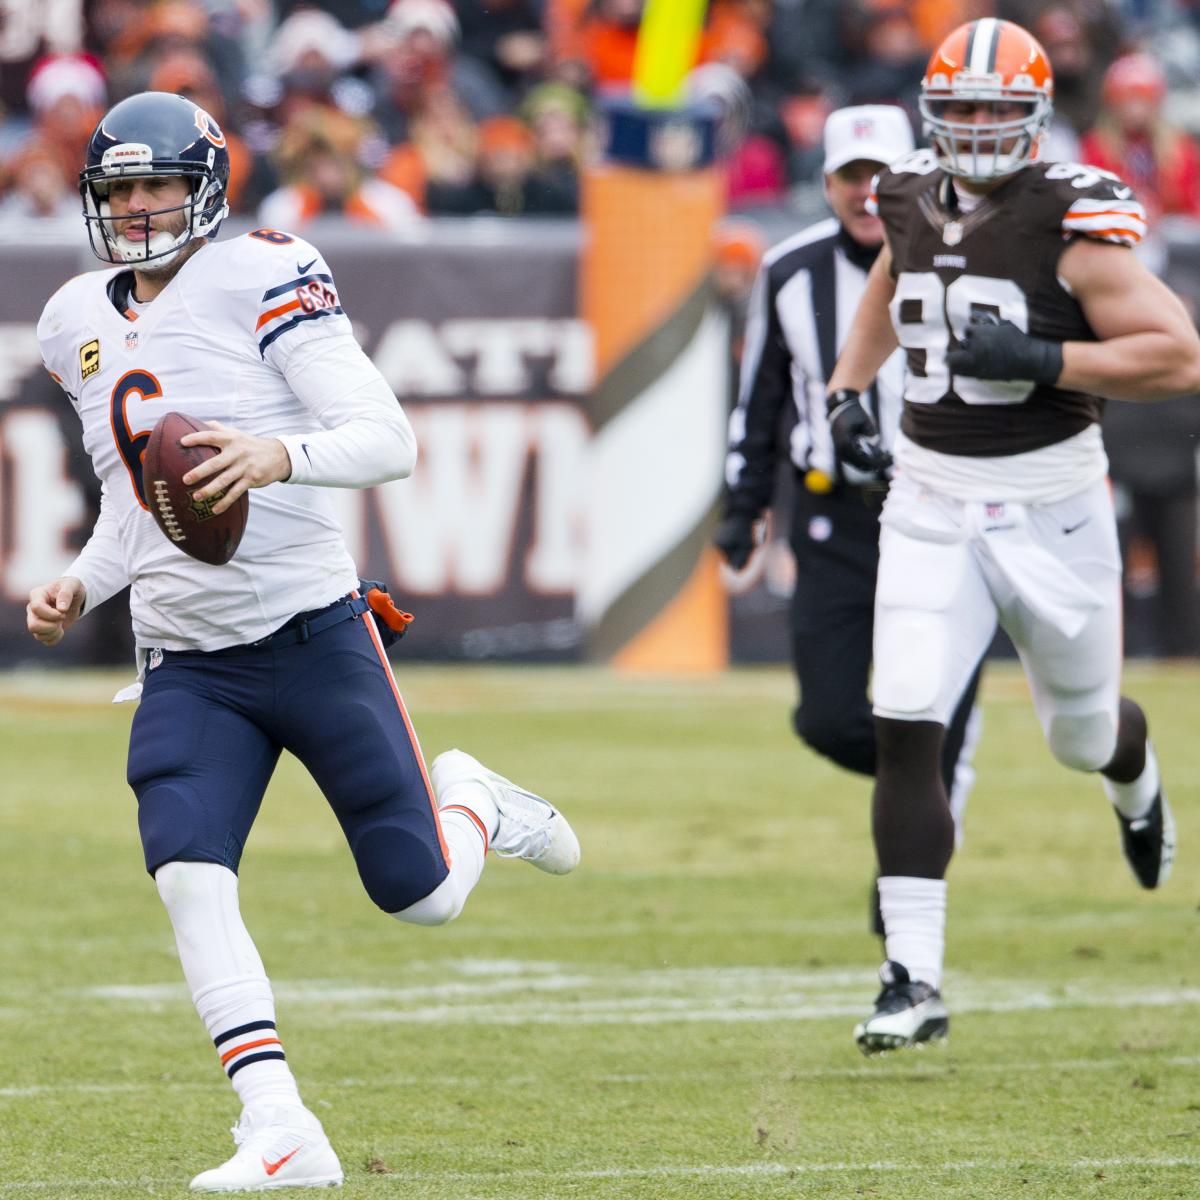 Chicago Bears vs. Cleveland Browns Live Score and Analysis News